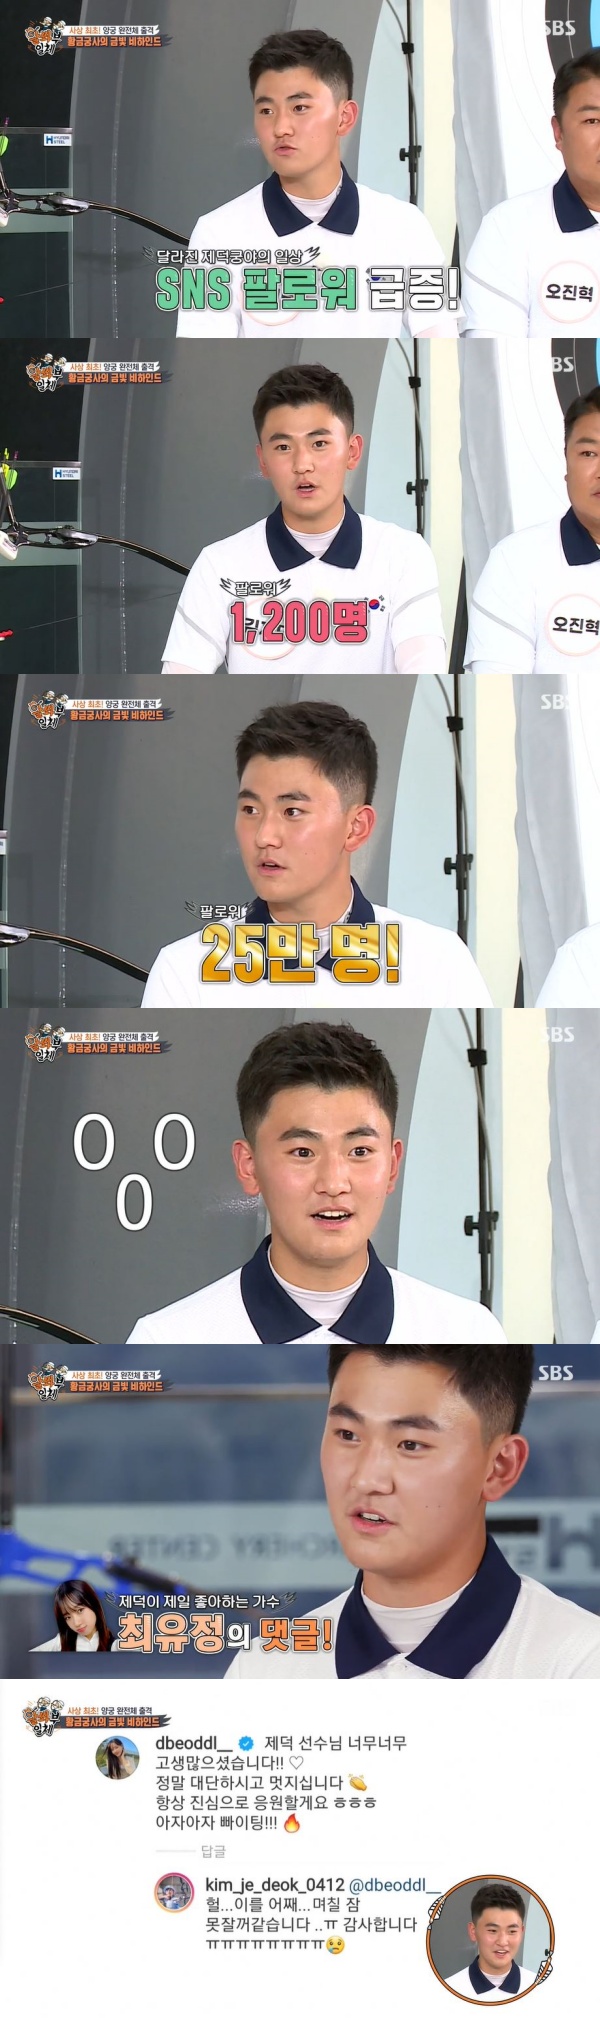 On the 22nd, SBS entertainment program All The Butlers depicted the gold medalist of the Tokyo Olympics.Kim je-deok referred to the number of SNS Followers that surged.The number of SNS Followers has changed a lot before and after the Olympics, he said. Before the Olympics, there were 1,200, but after the Olympics, it was 250,000.The Comment of Choi Yoo-jung was an honor, Kim je-deok said, but I didnt know it, but my friends informed me.Kang Chae-young said, Jedeok boasted to me from the dawn on the day of Comment.Meanwhile, All The Butlers is a life extracurricular entertainment program with youths full of question marks and myway geek masters. It airs every Sunday at 6:25 p.m.Photo SBS broadcast screen capture